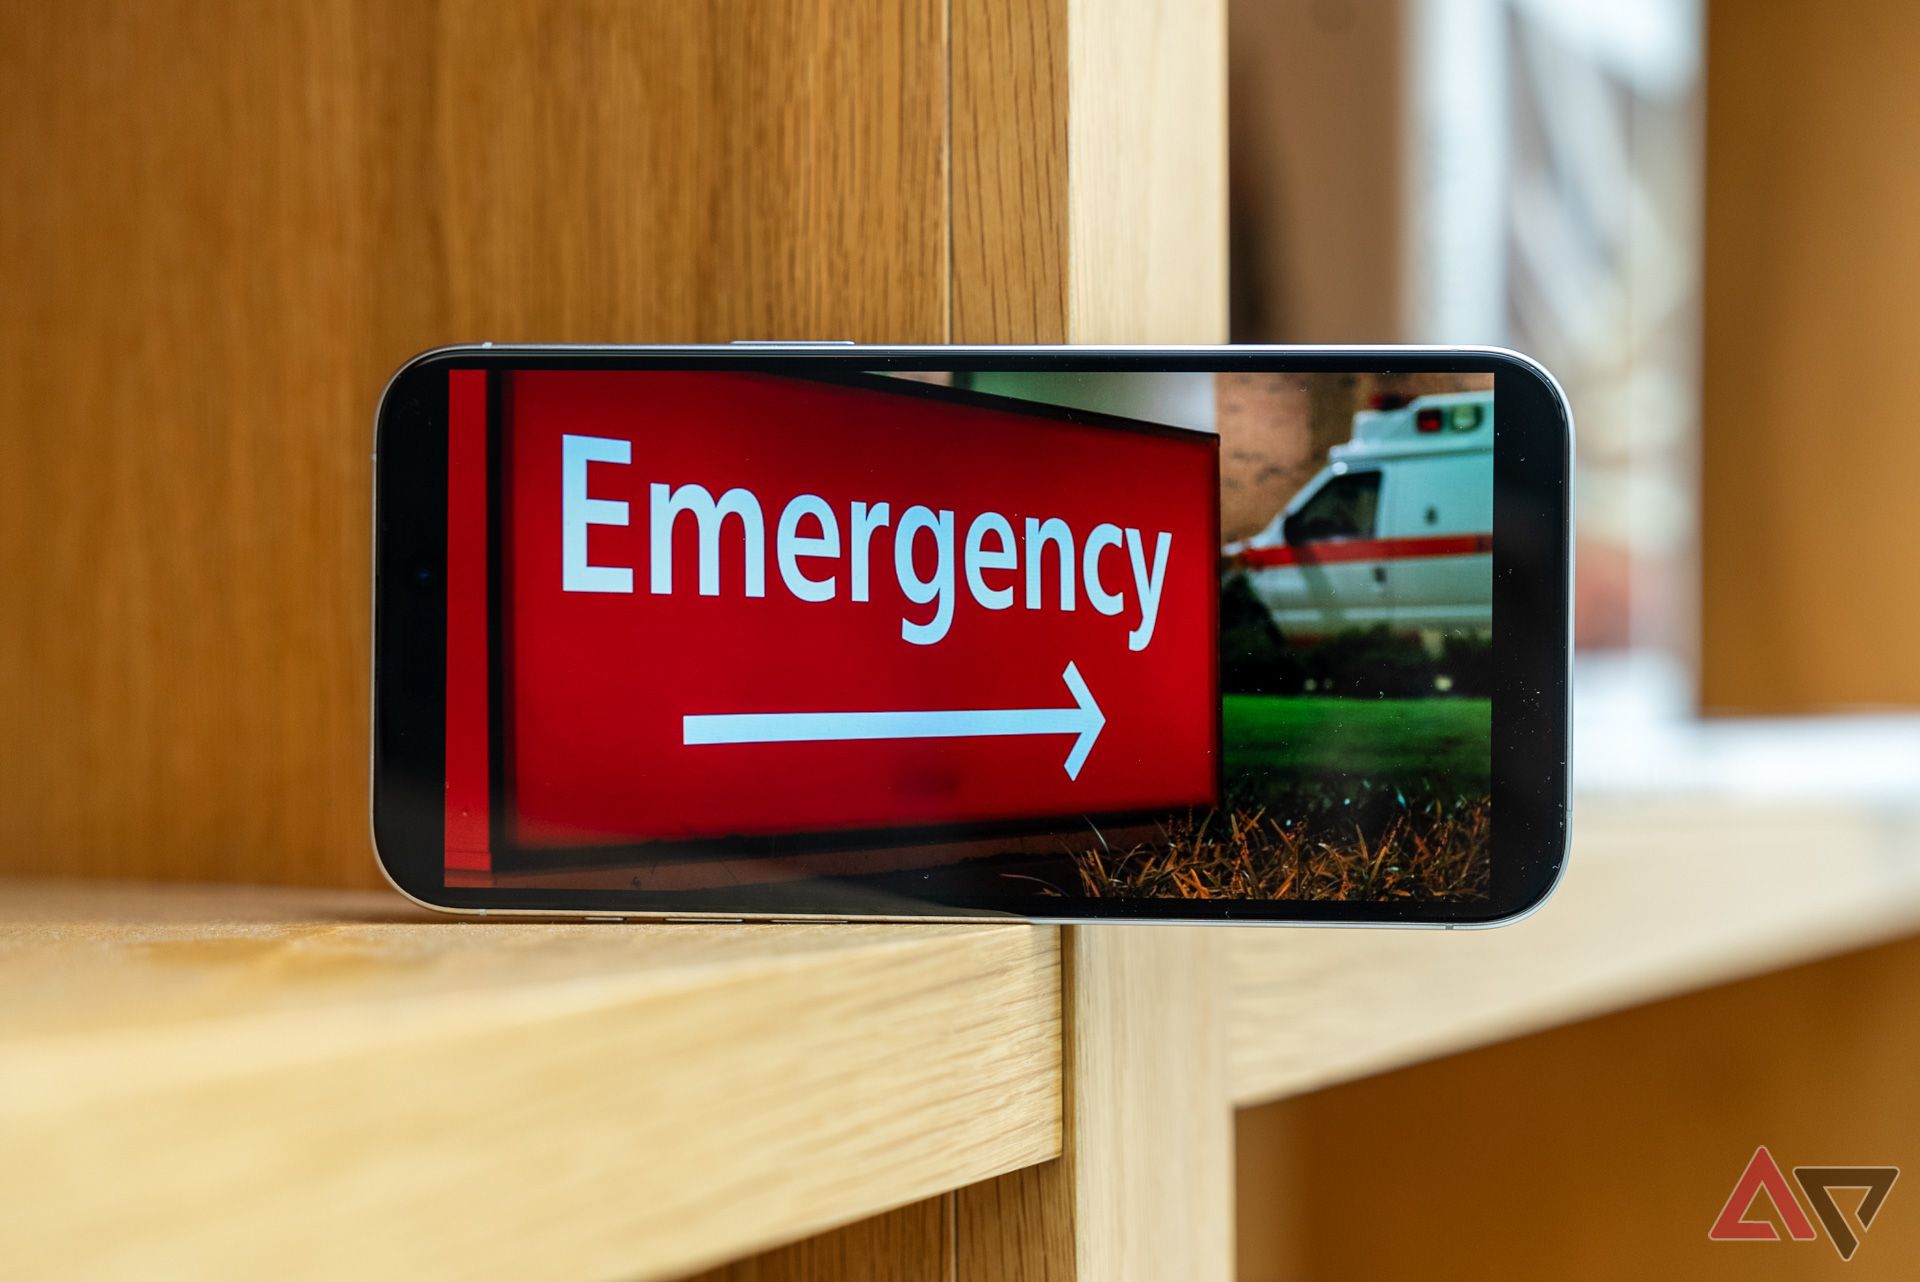 An iPhone showing a picture of an Emergency room sign